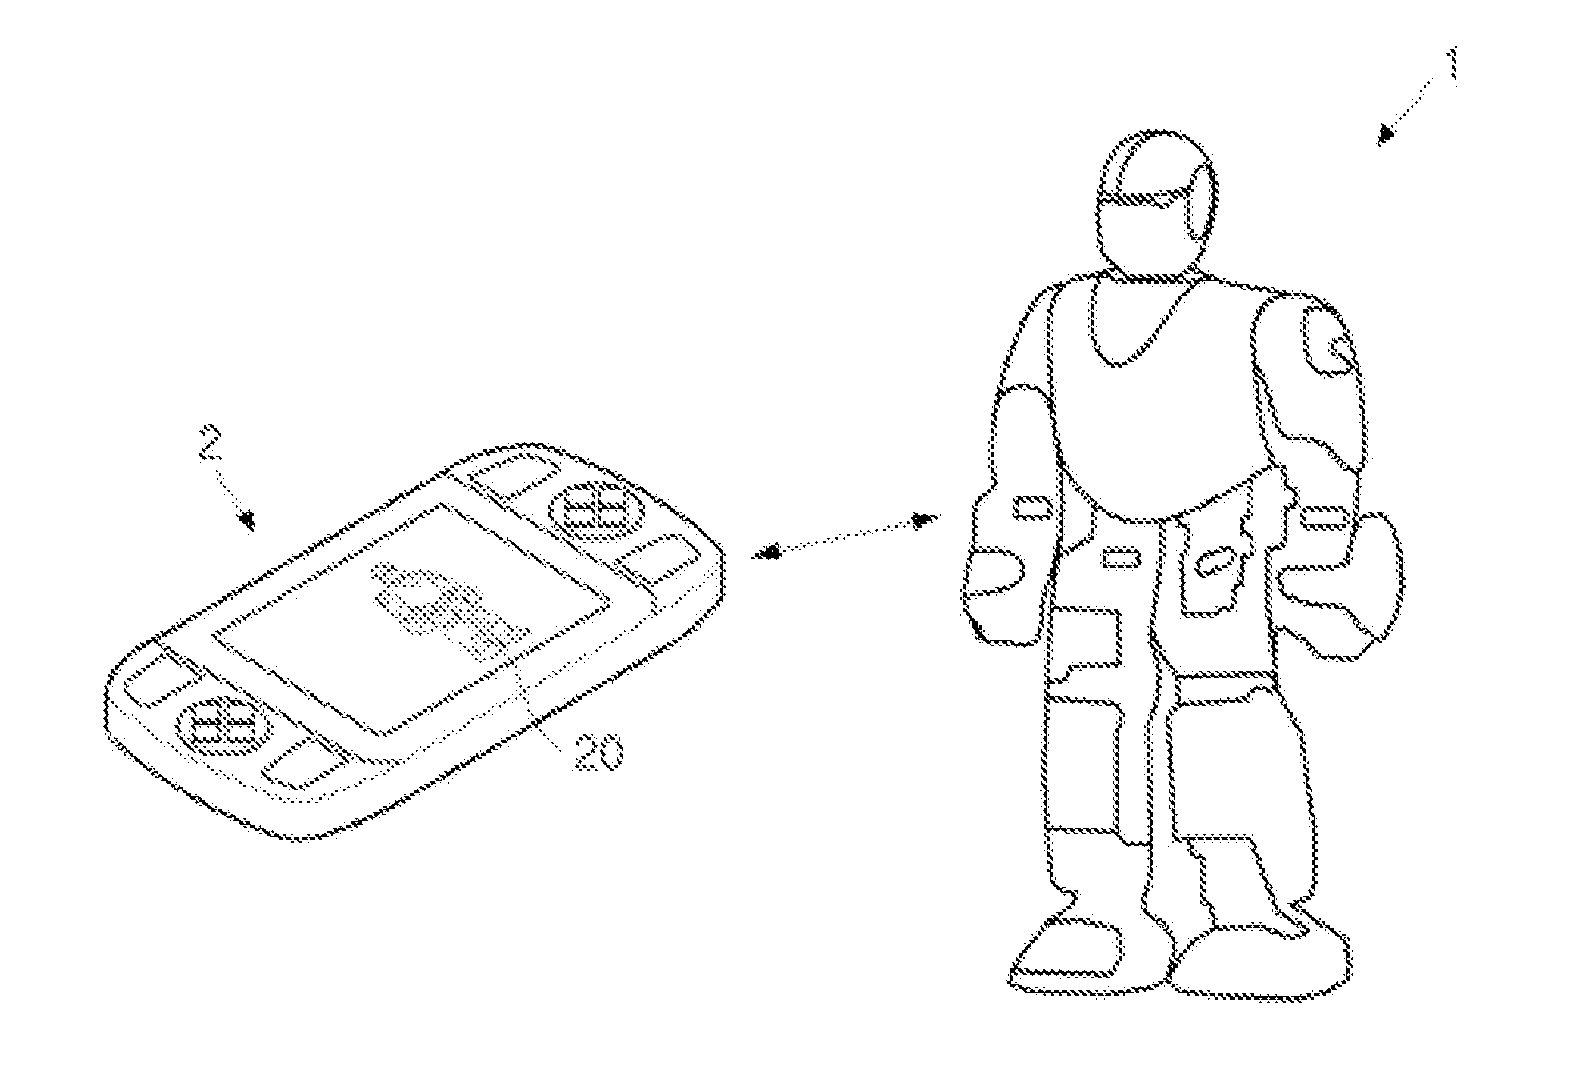 Apparatus and method for synchronizing robots